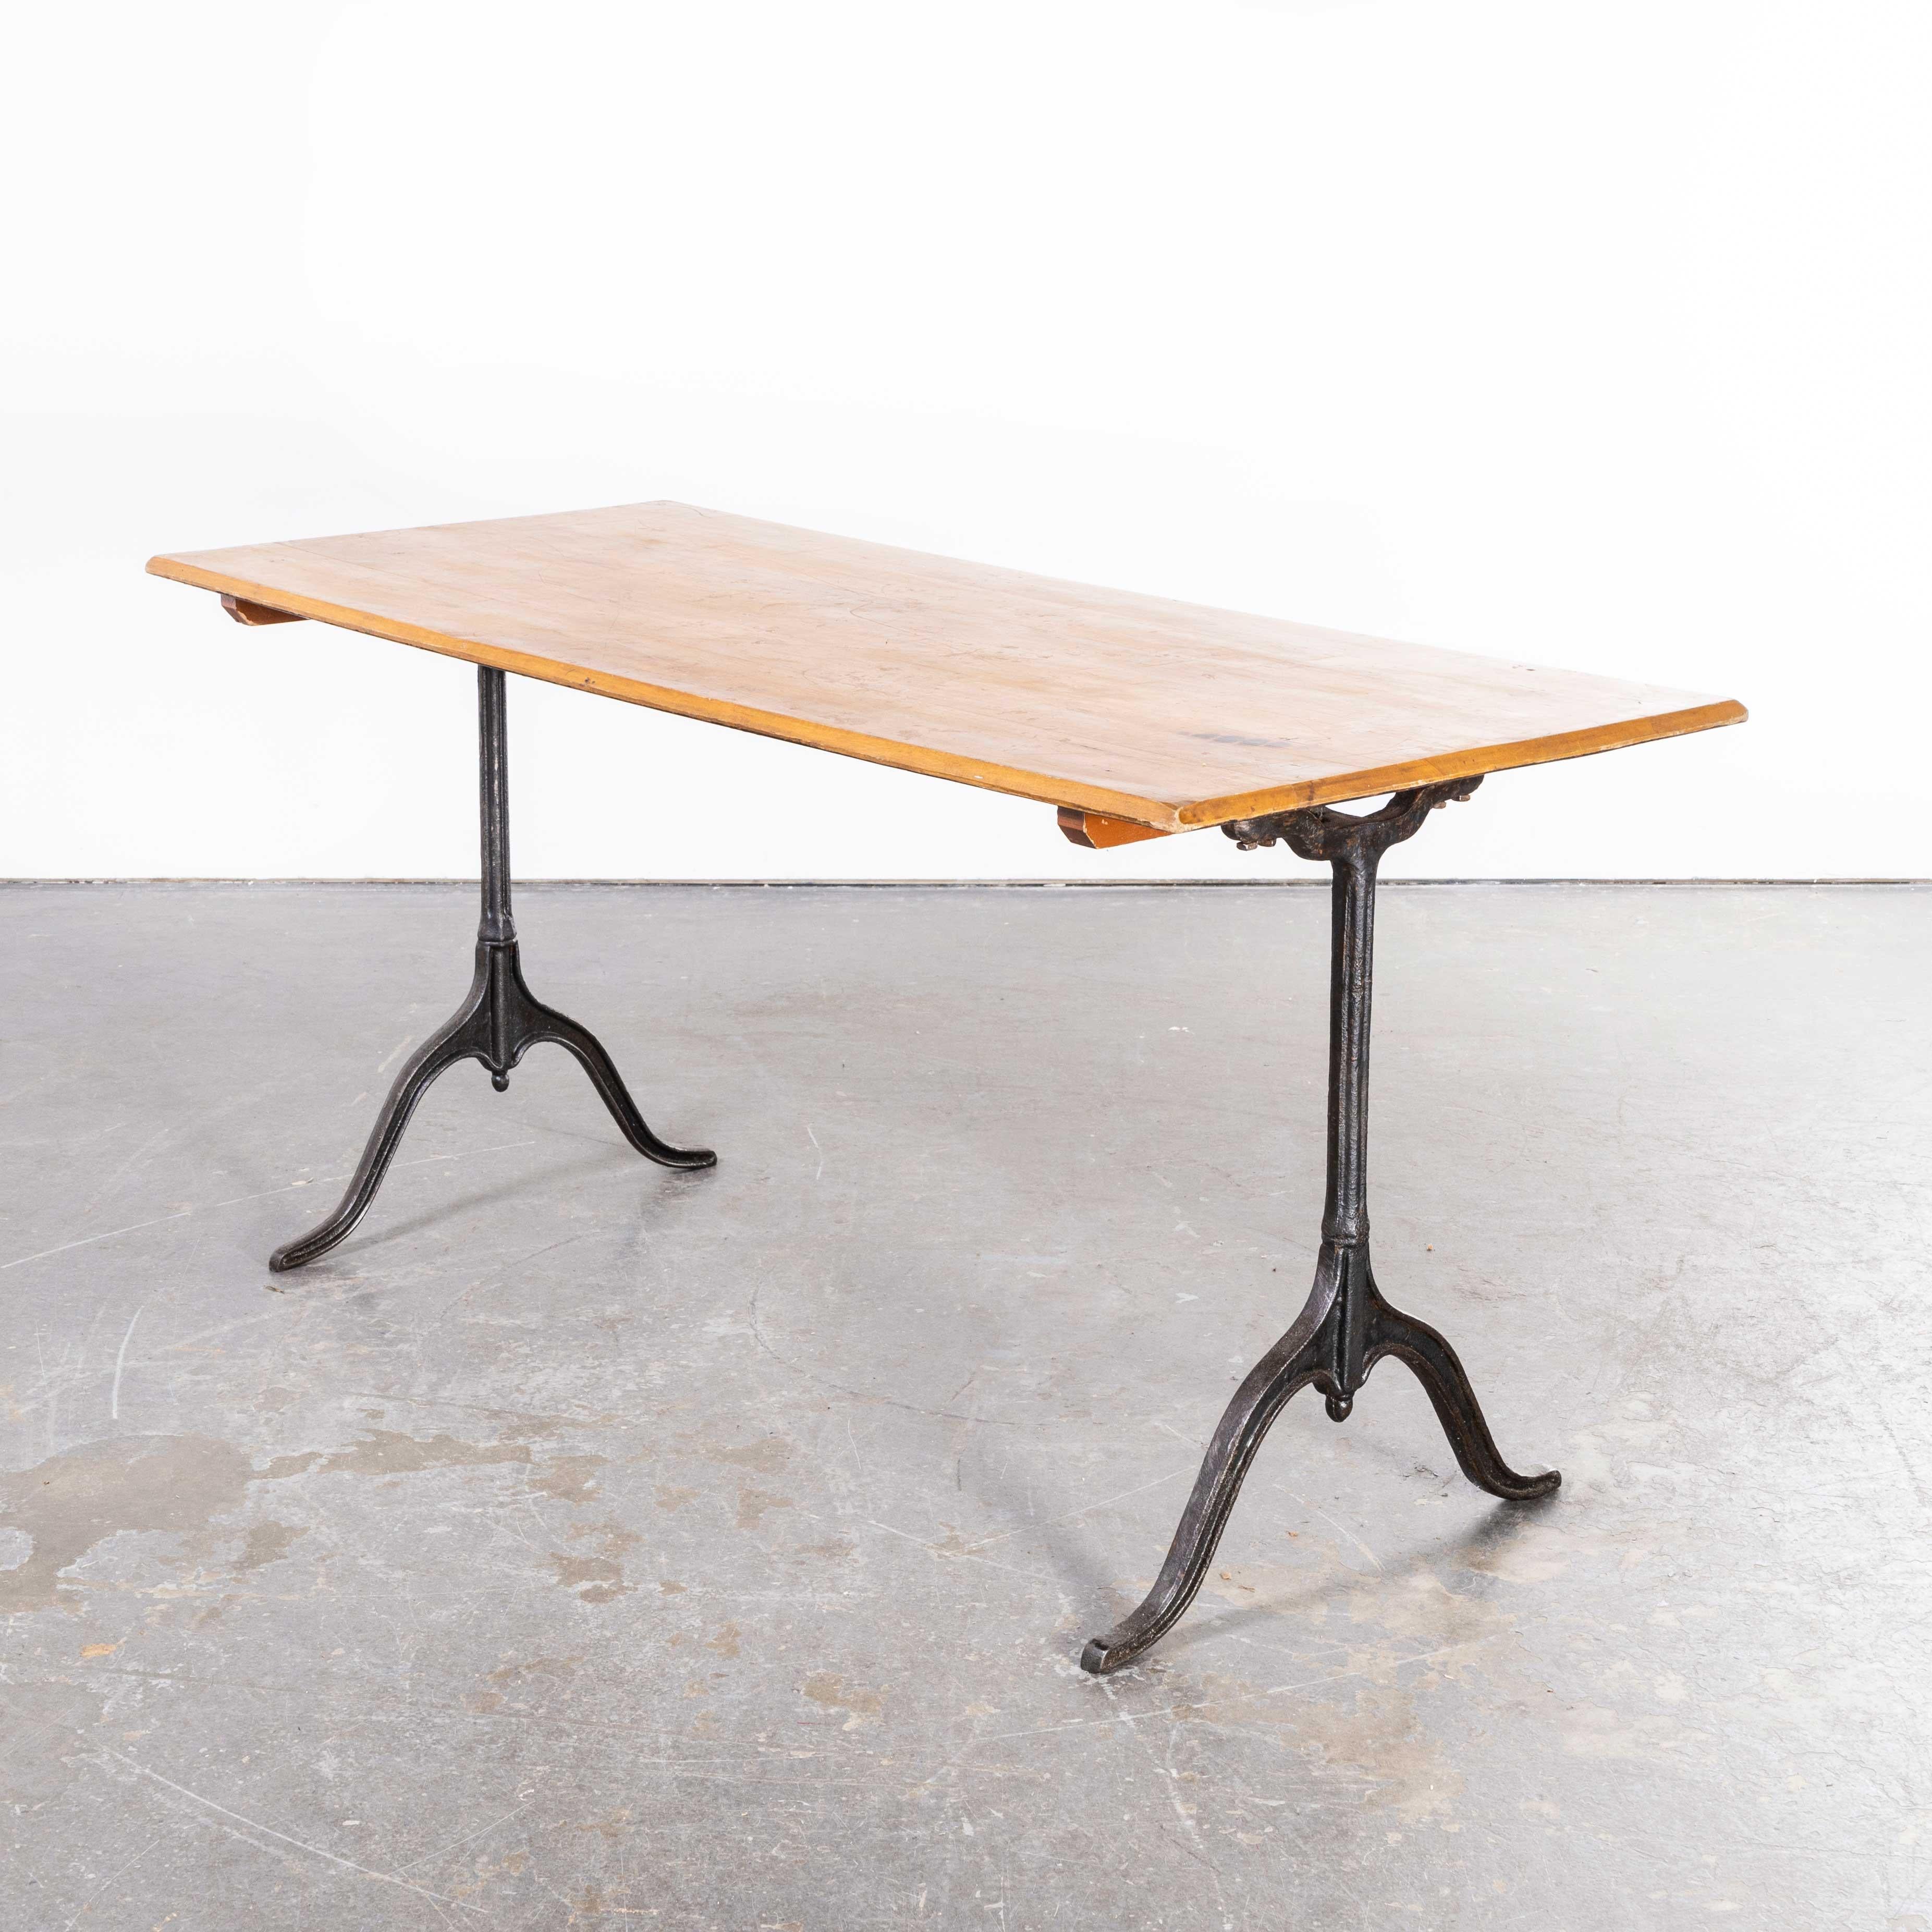 1930’s Cast metal base Kronenbourg Café dining – bistro table (749.10)
1930’s Cast metal base Kronenbourg Café dining – bistro table. Sourced from the original Kronenbourg site in Alsace, these were found languishing in a disused part of the works,